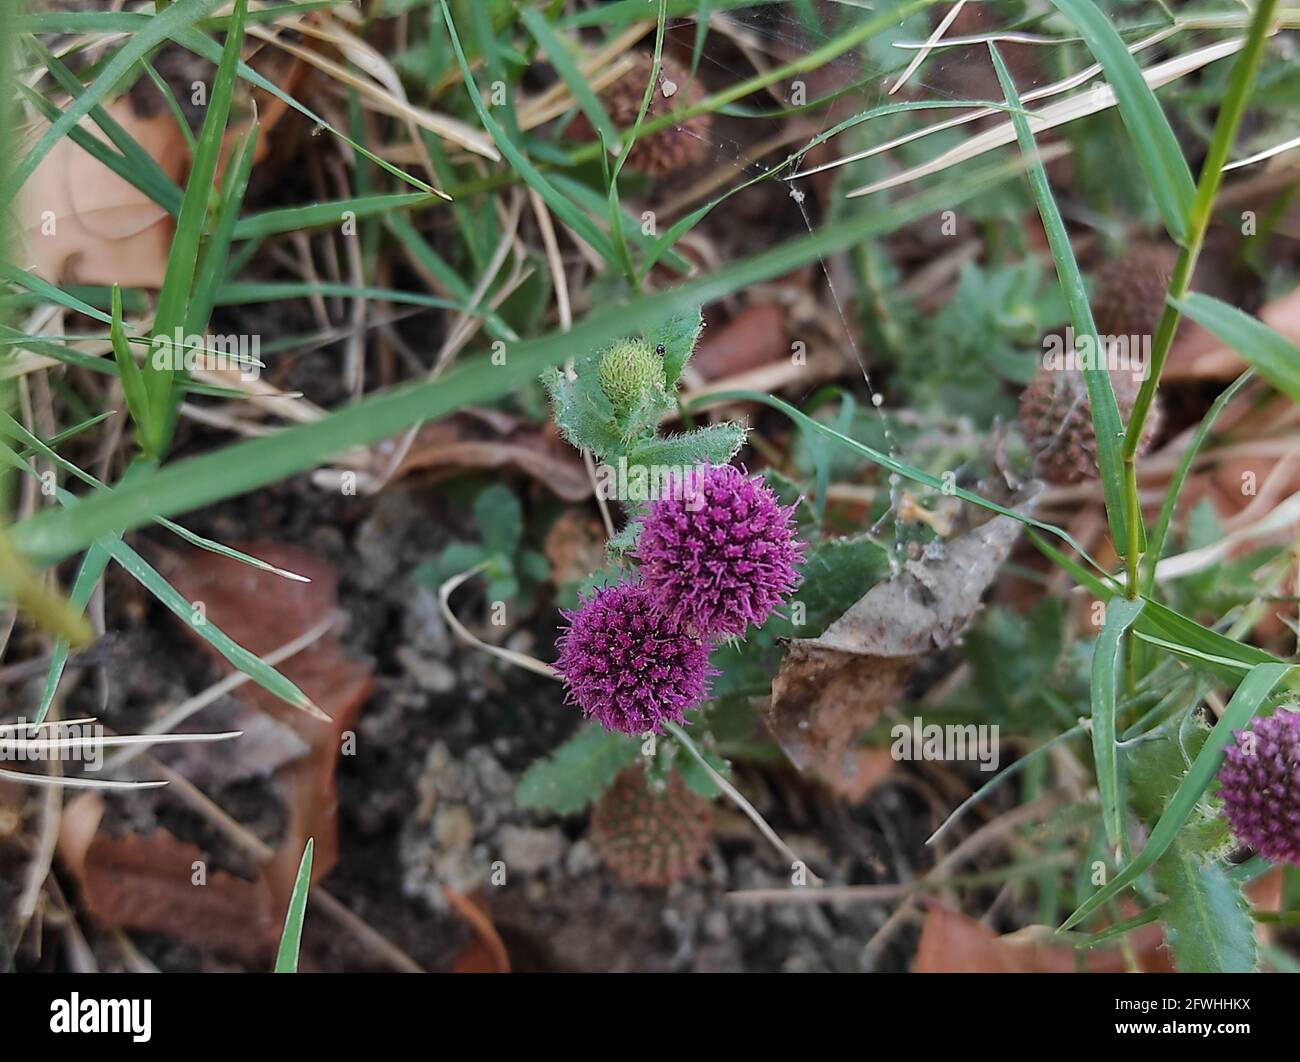 Closeup of East Indian globe thistles growing in the garden Stock Photo